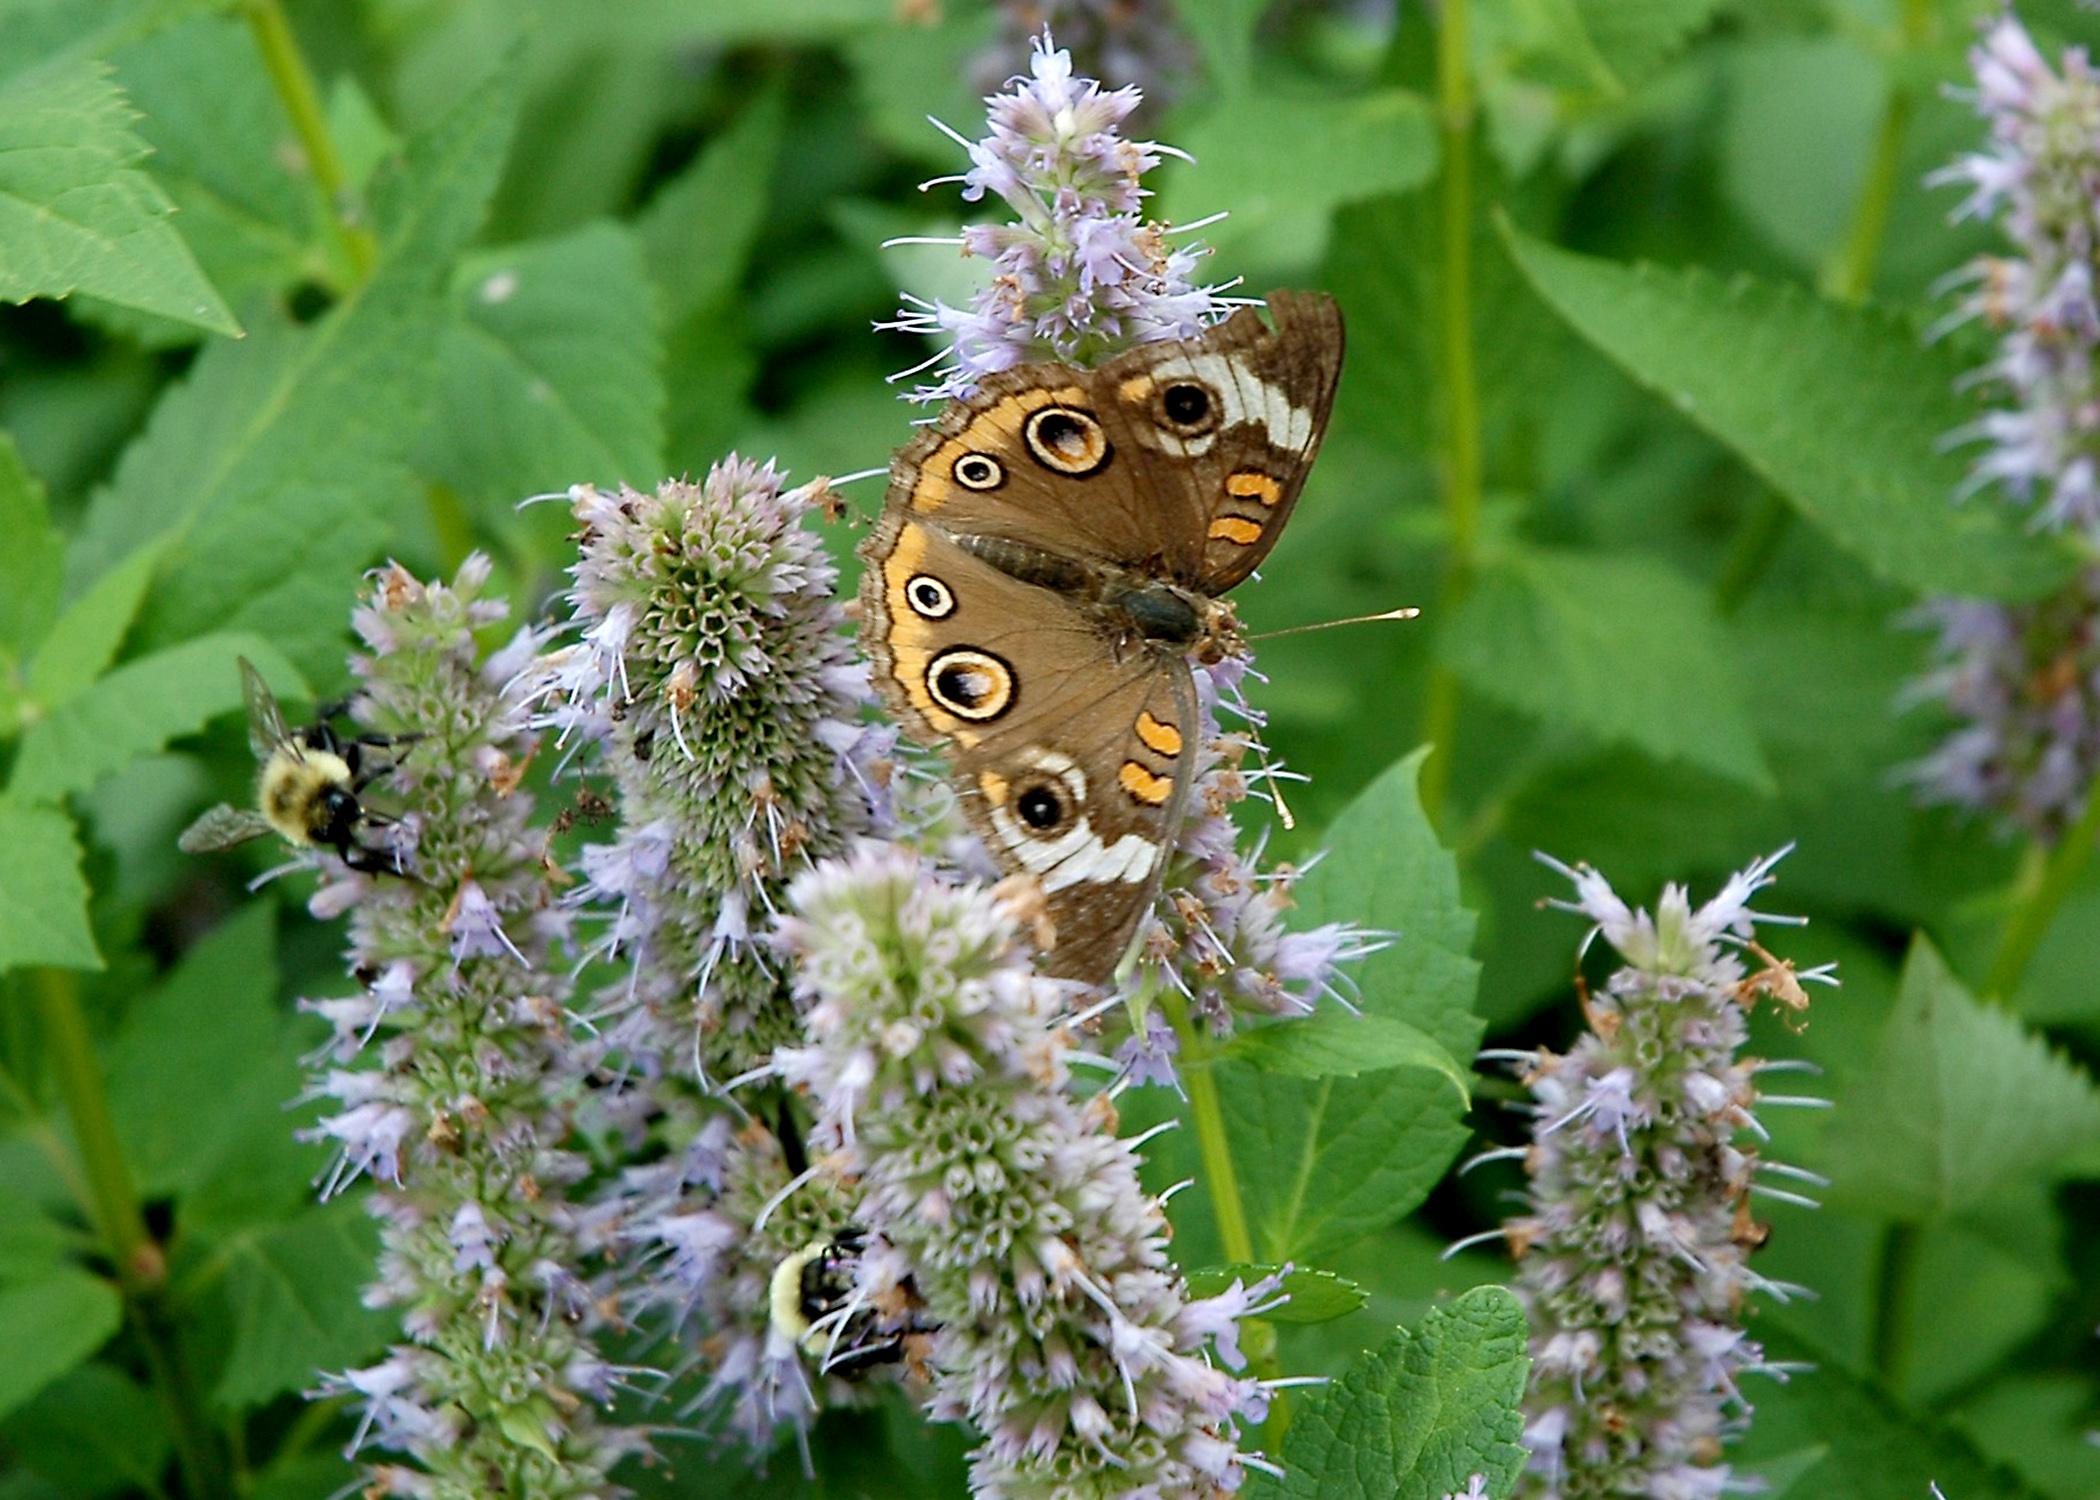 Butterflies, such as this buckeye butterfly, and other plants, animals and insects will be counted during the Mississippi BioBlitz on Sept. 13, 2014, at the Mississippi Museum of Natural Science in Jackson. BioBlitz is a 13-hour event that teams scientists, students, teachers and community members to track down and identify as many local species as possible. (MSU Ag Communications/File Photo)